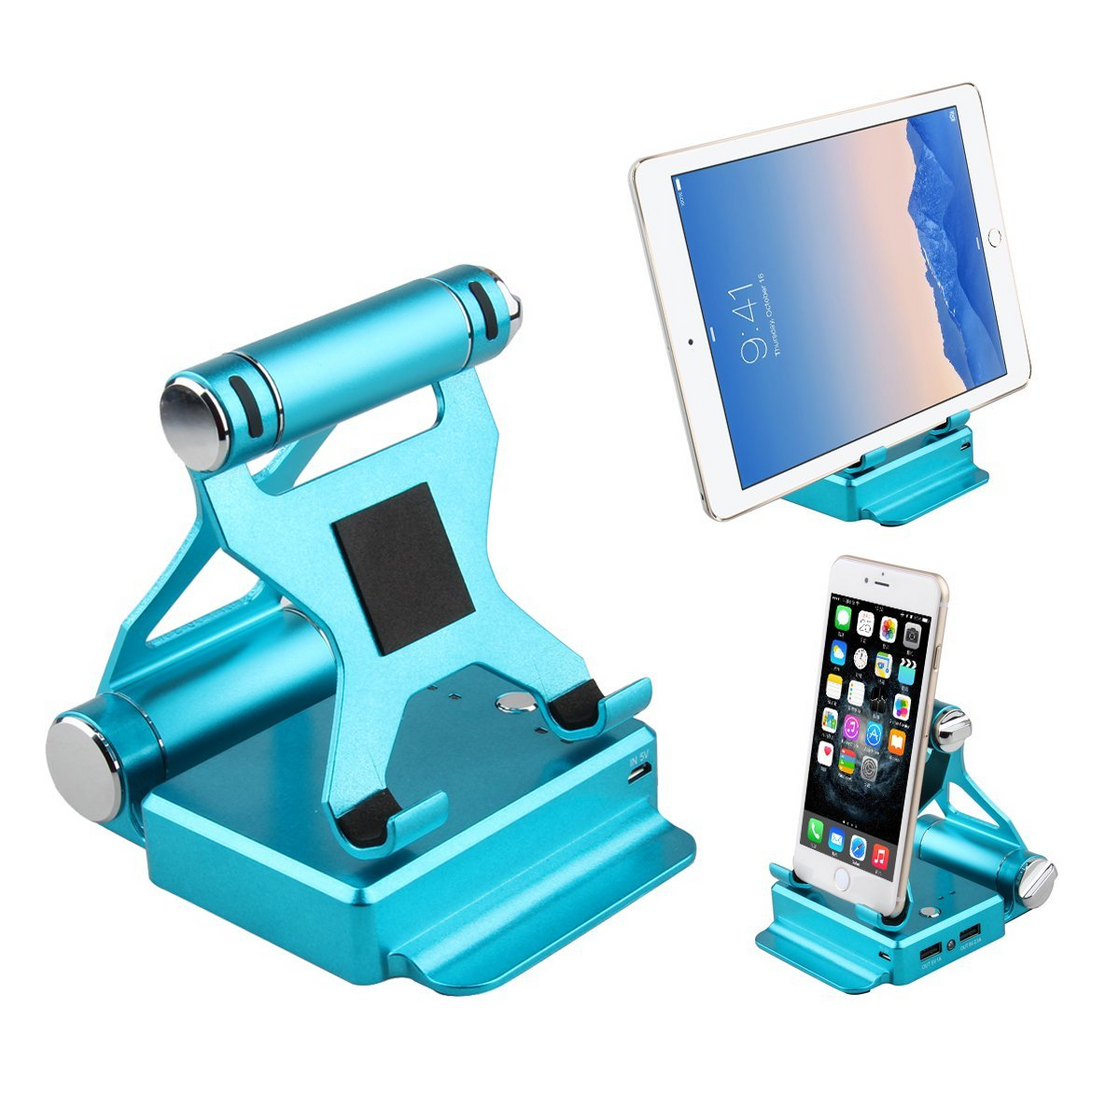 Podium Style Stand With Extended Battery Up To 200% For iPad, iPhone And Other Smart Gadgets